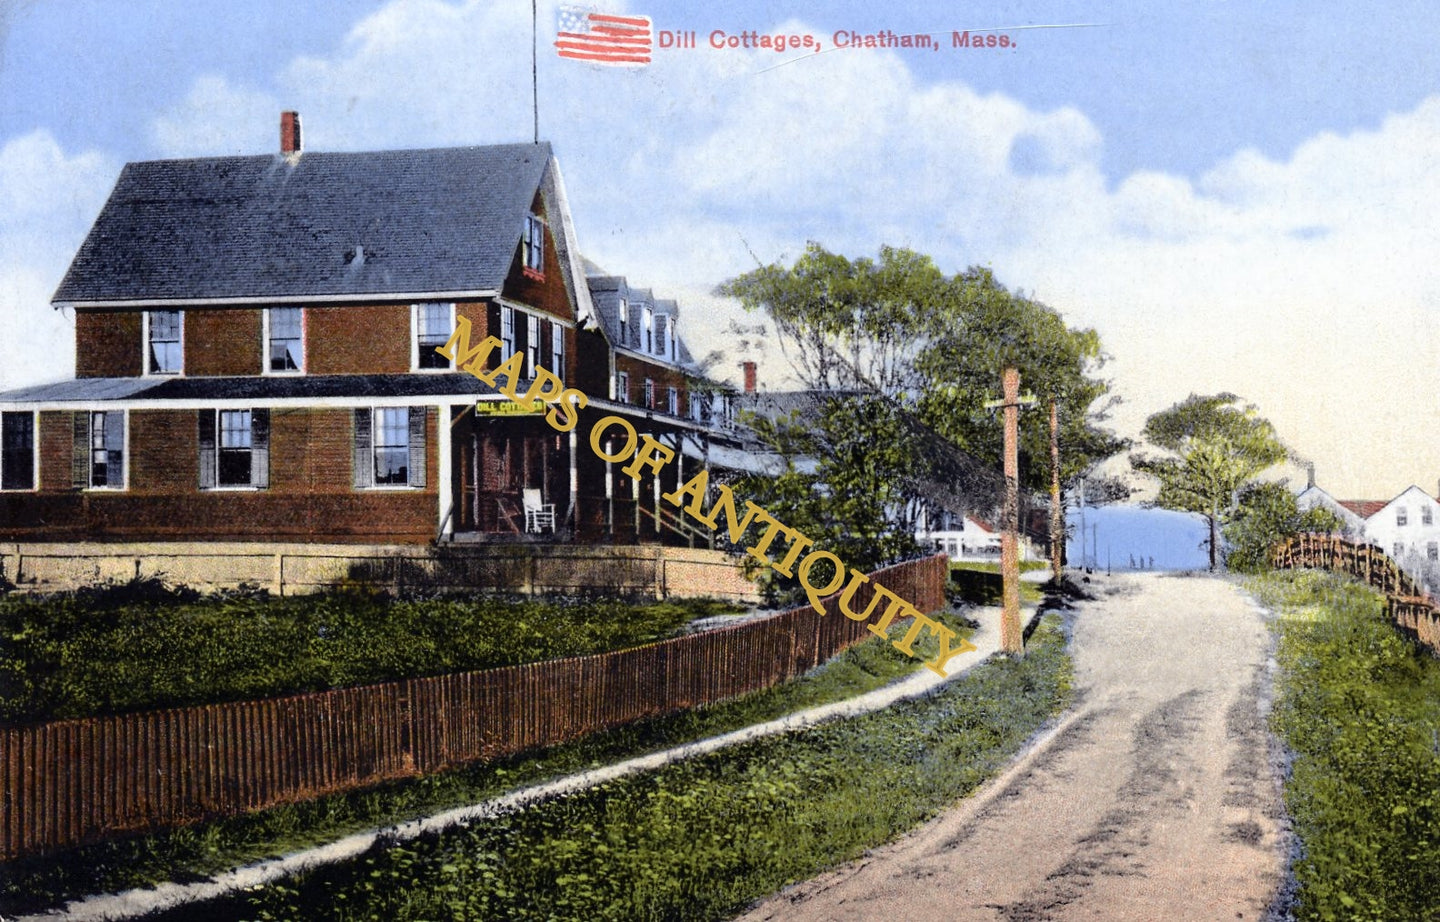 Early-colored-printed-in-Germany-Dill-Cottages-Chatham-MA---Postcard**********--Antique-Postcards-1905-1935-Dickerman-Maps-Of-Antiquity